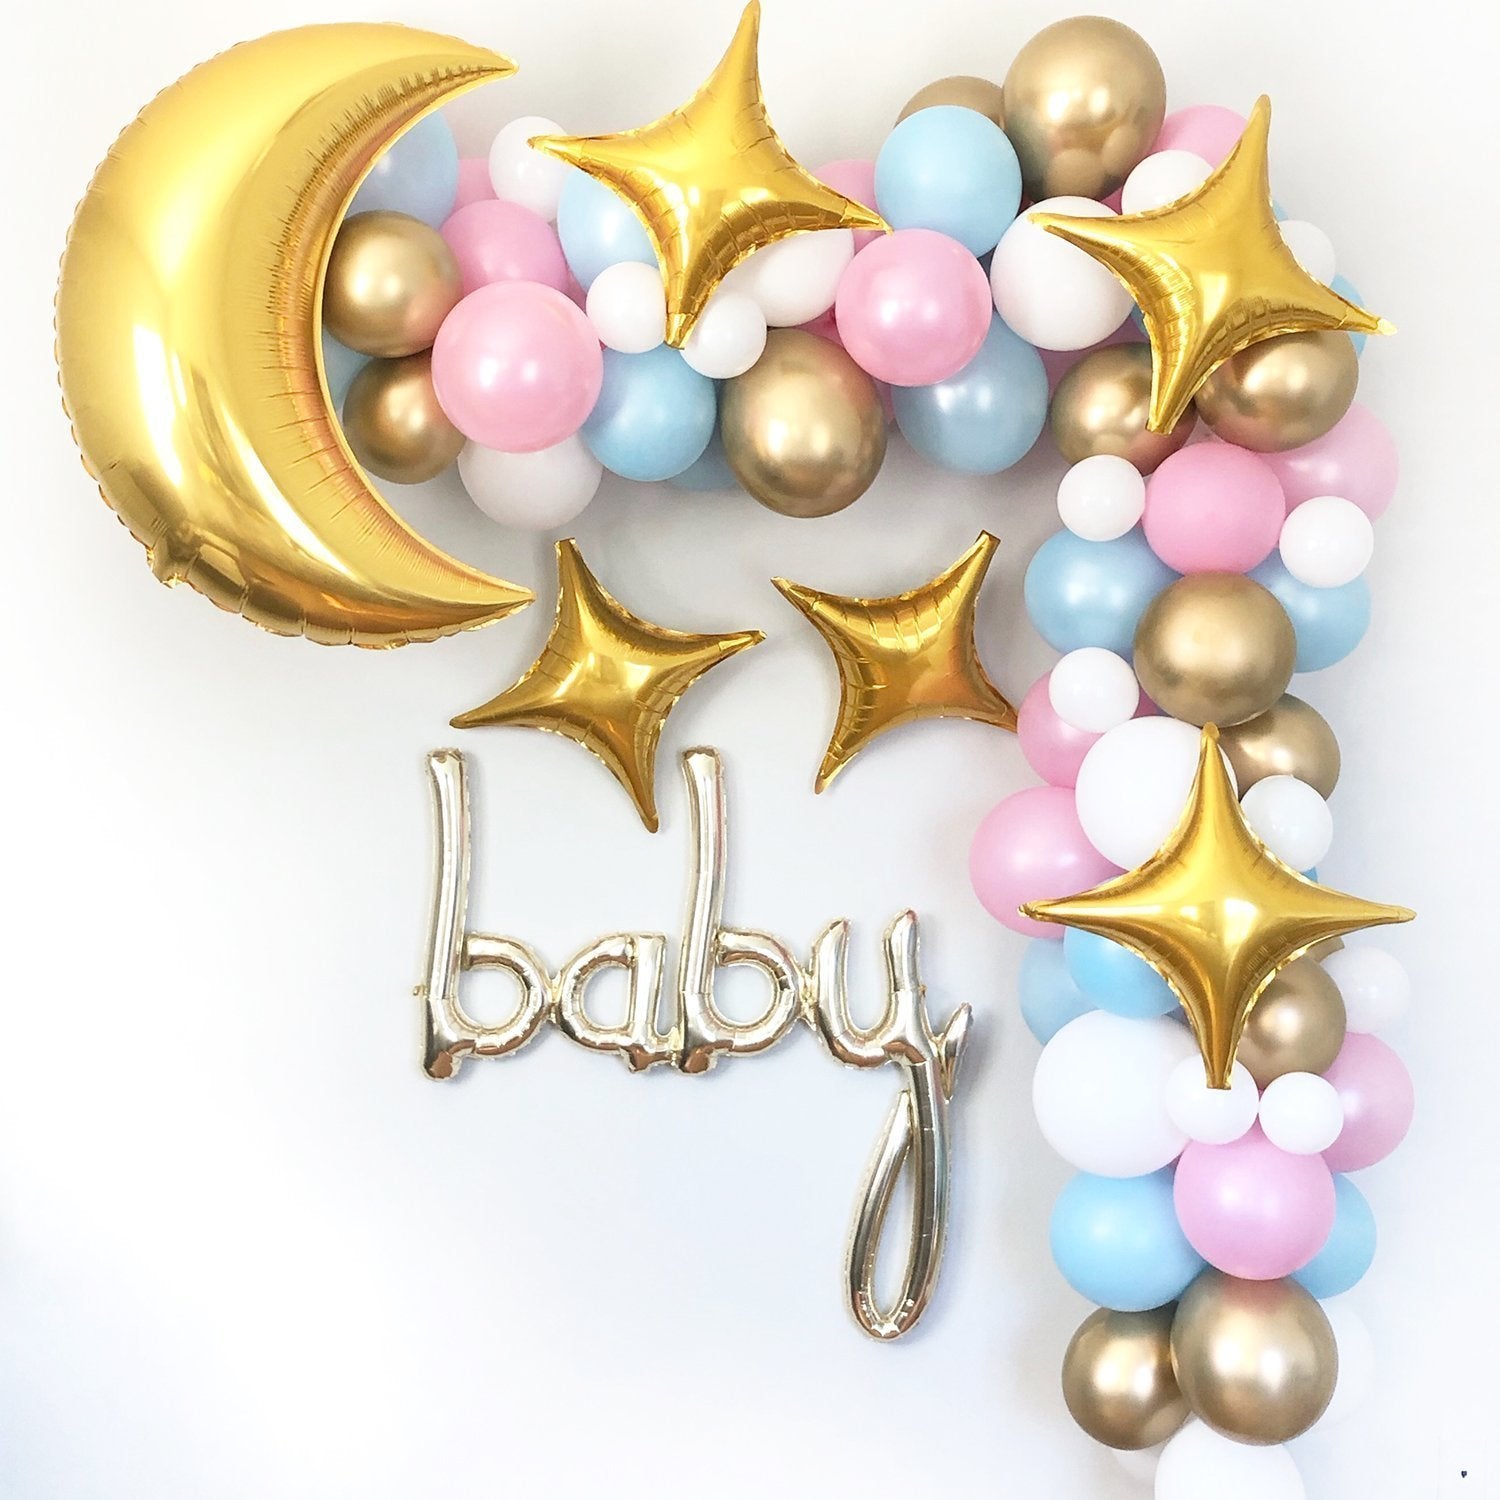 Twinkle Twinkle Little Star Balloon Garland Kit - Pink, Blue, Gold - Pretty Collected